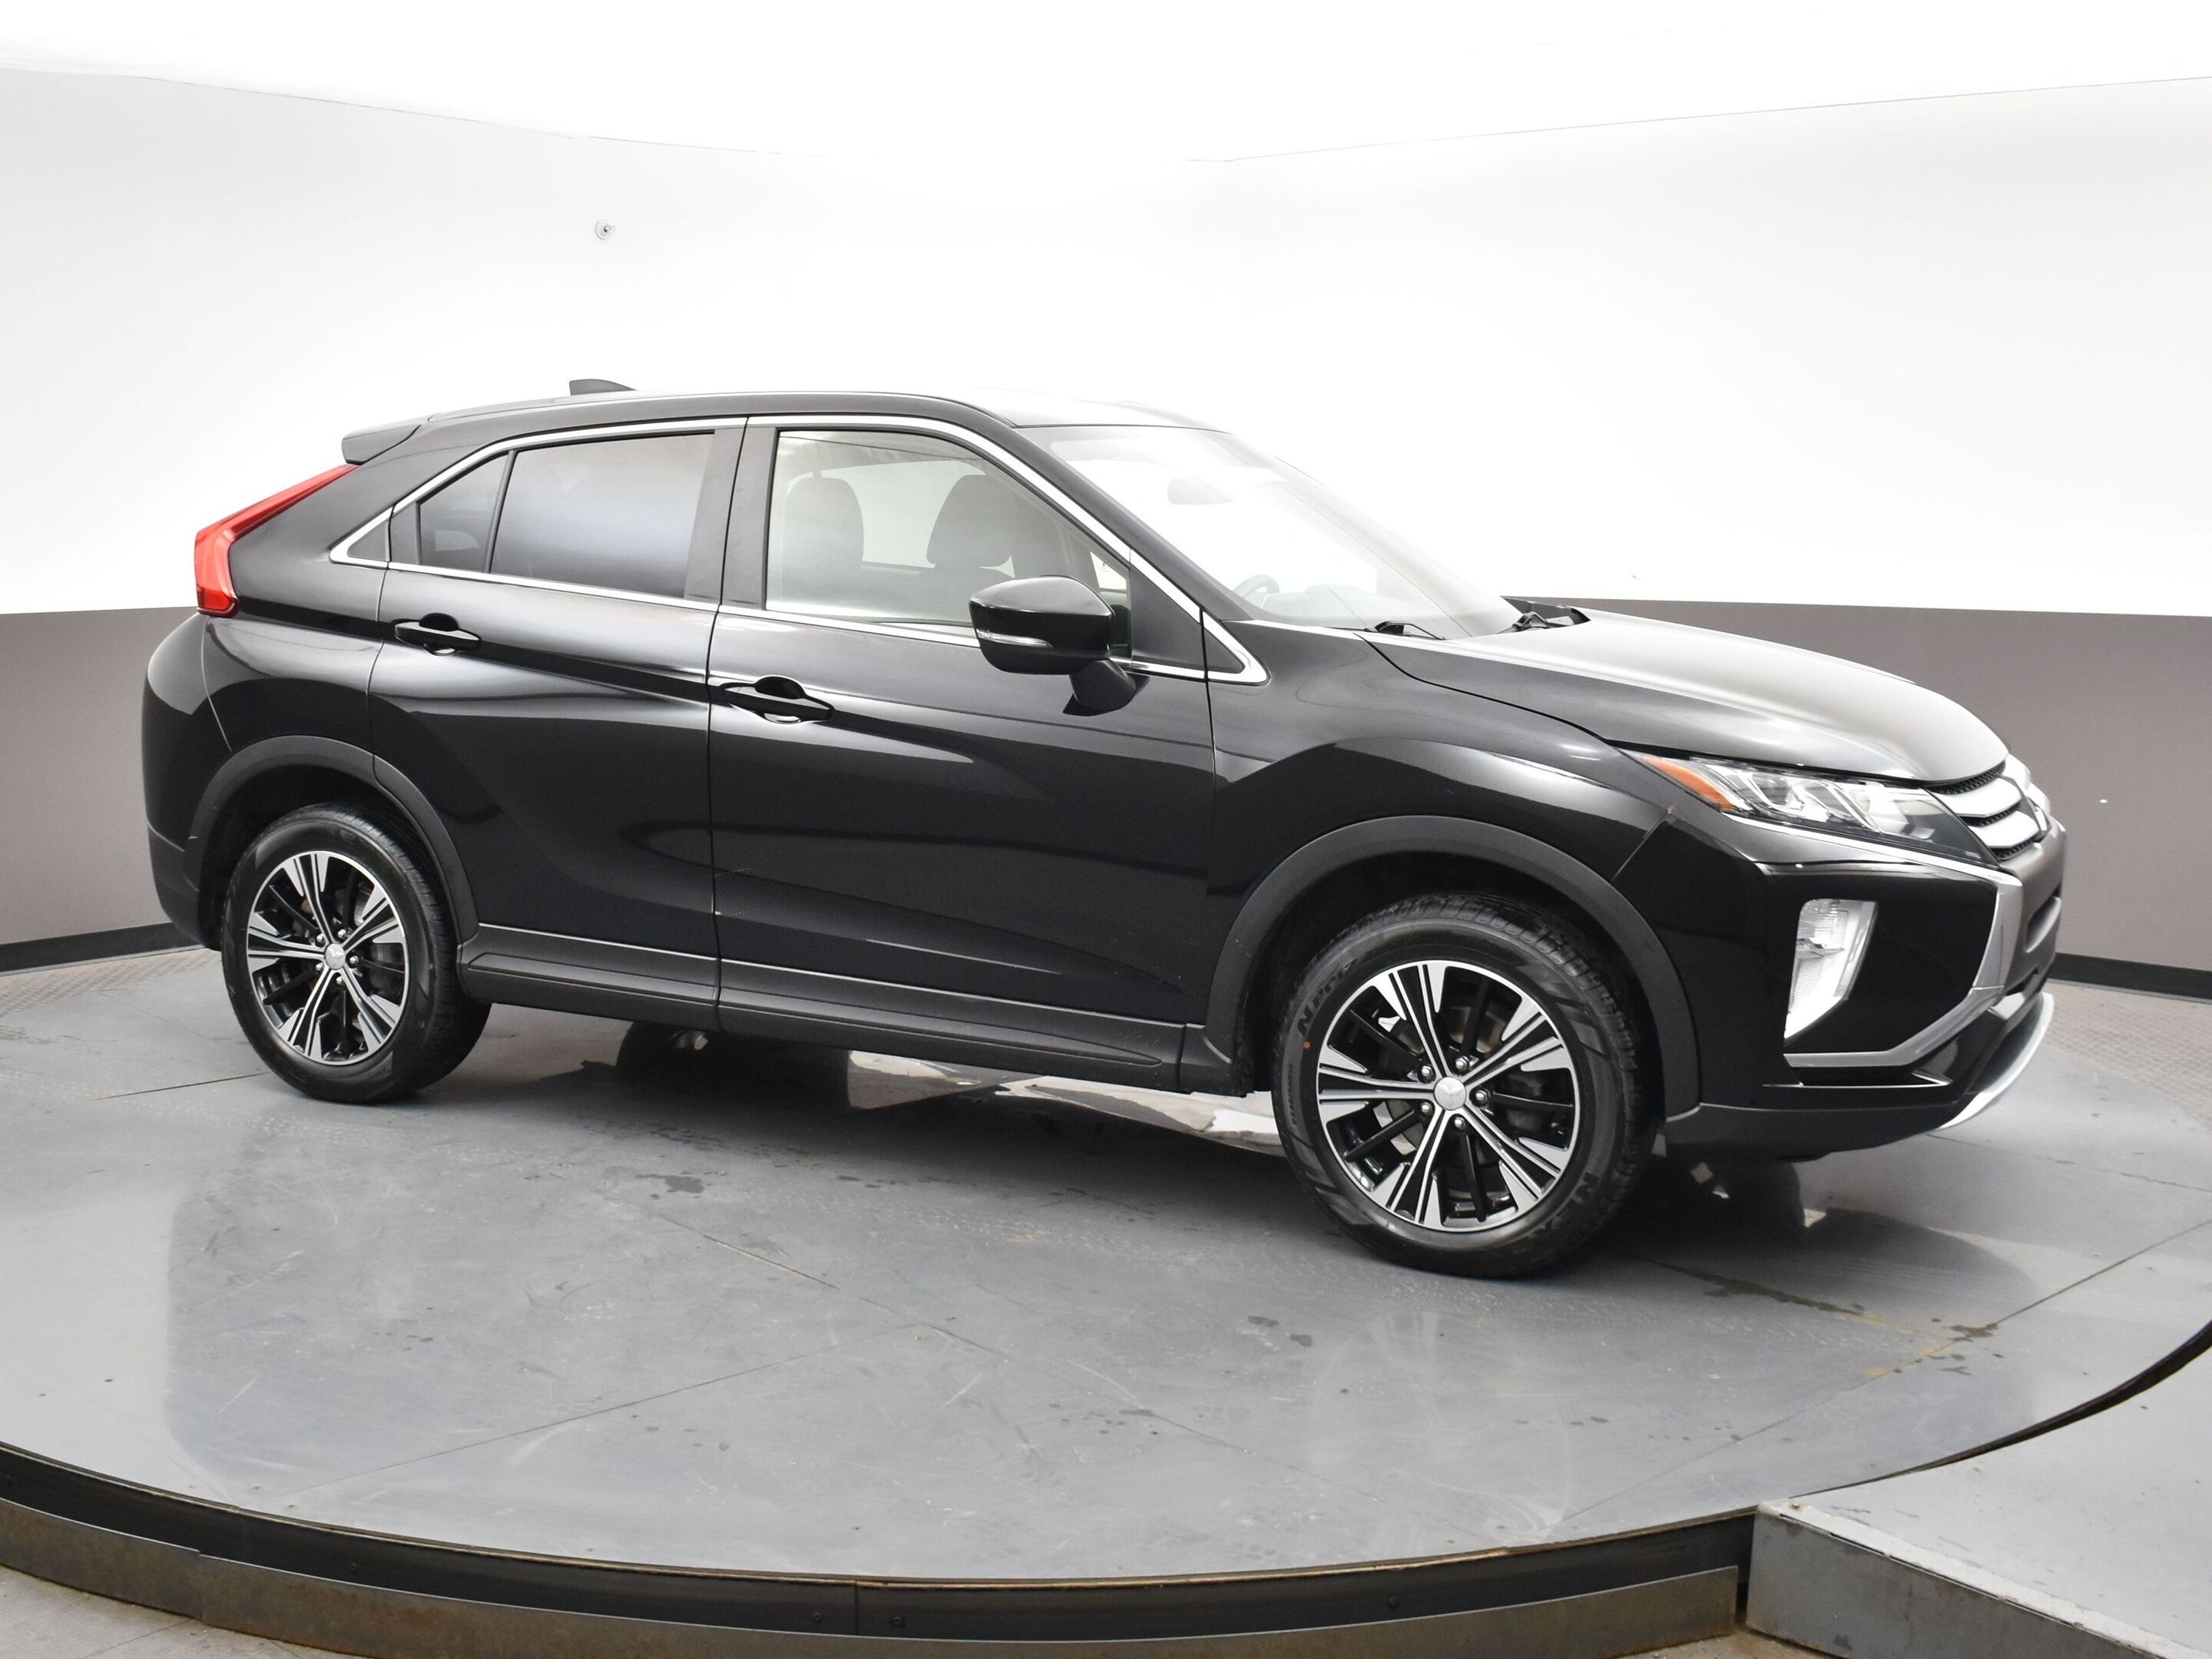 2020 Mitsubishi Eclipse Cross Black ES with Heated seats, back up camera, touch 